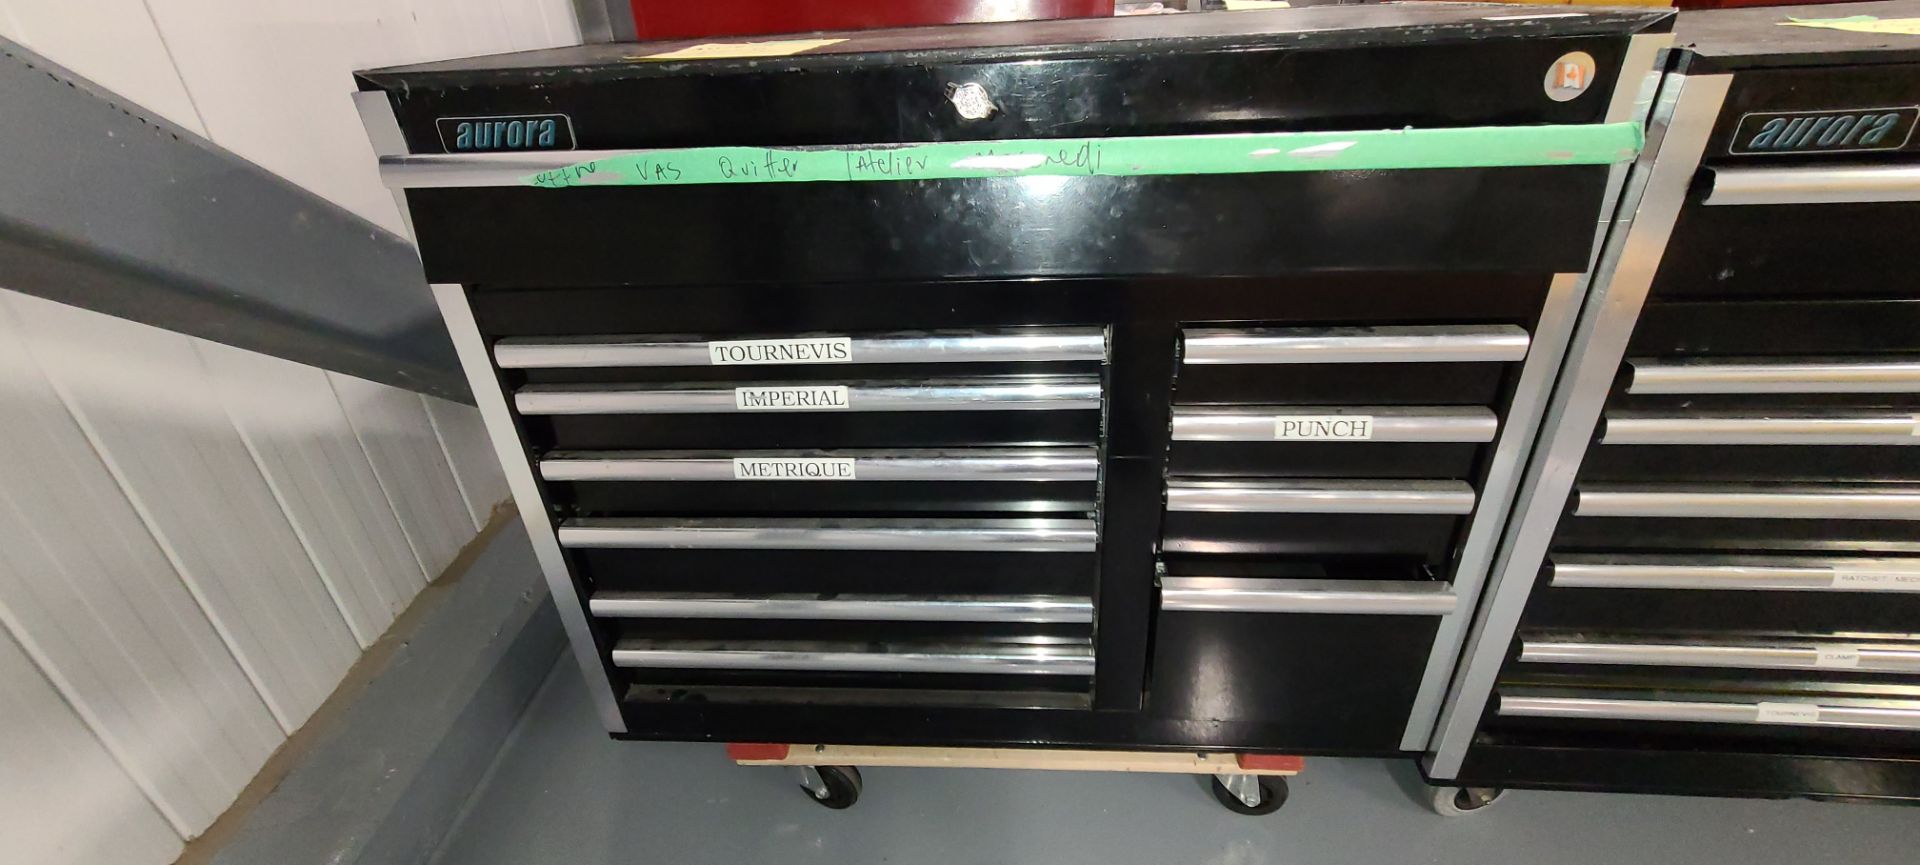 Aurora Rolling Tool Chest - Image 3 of 3